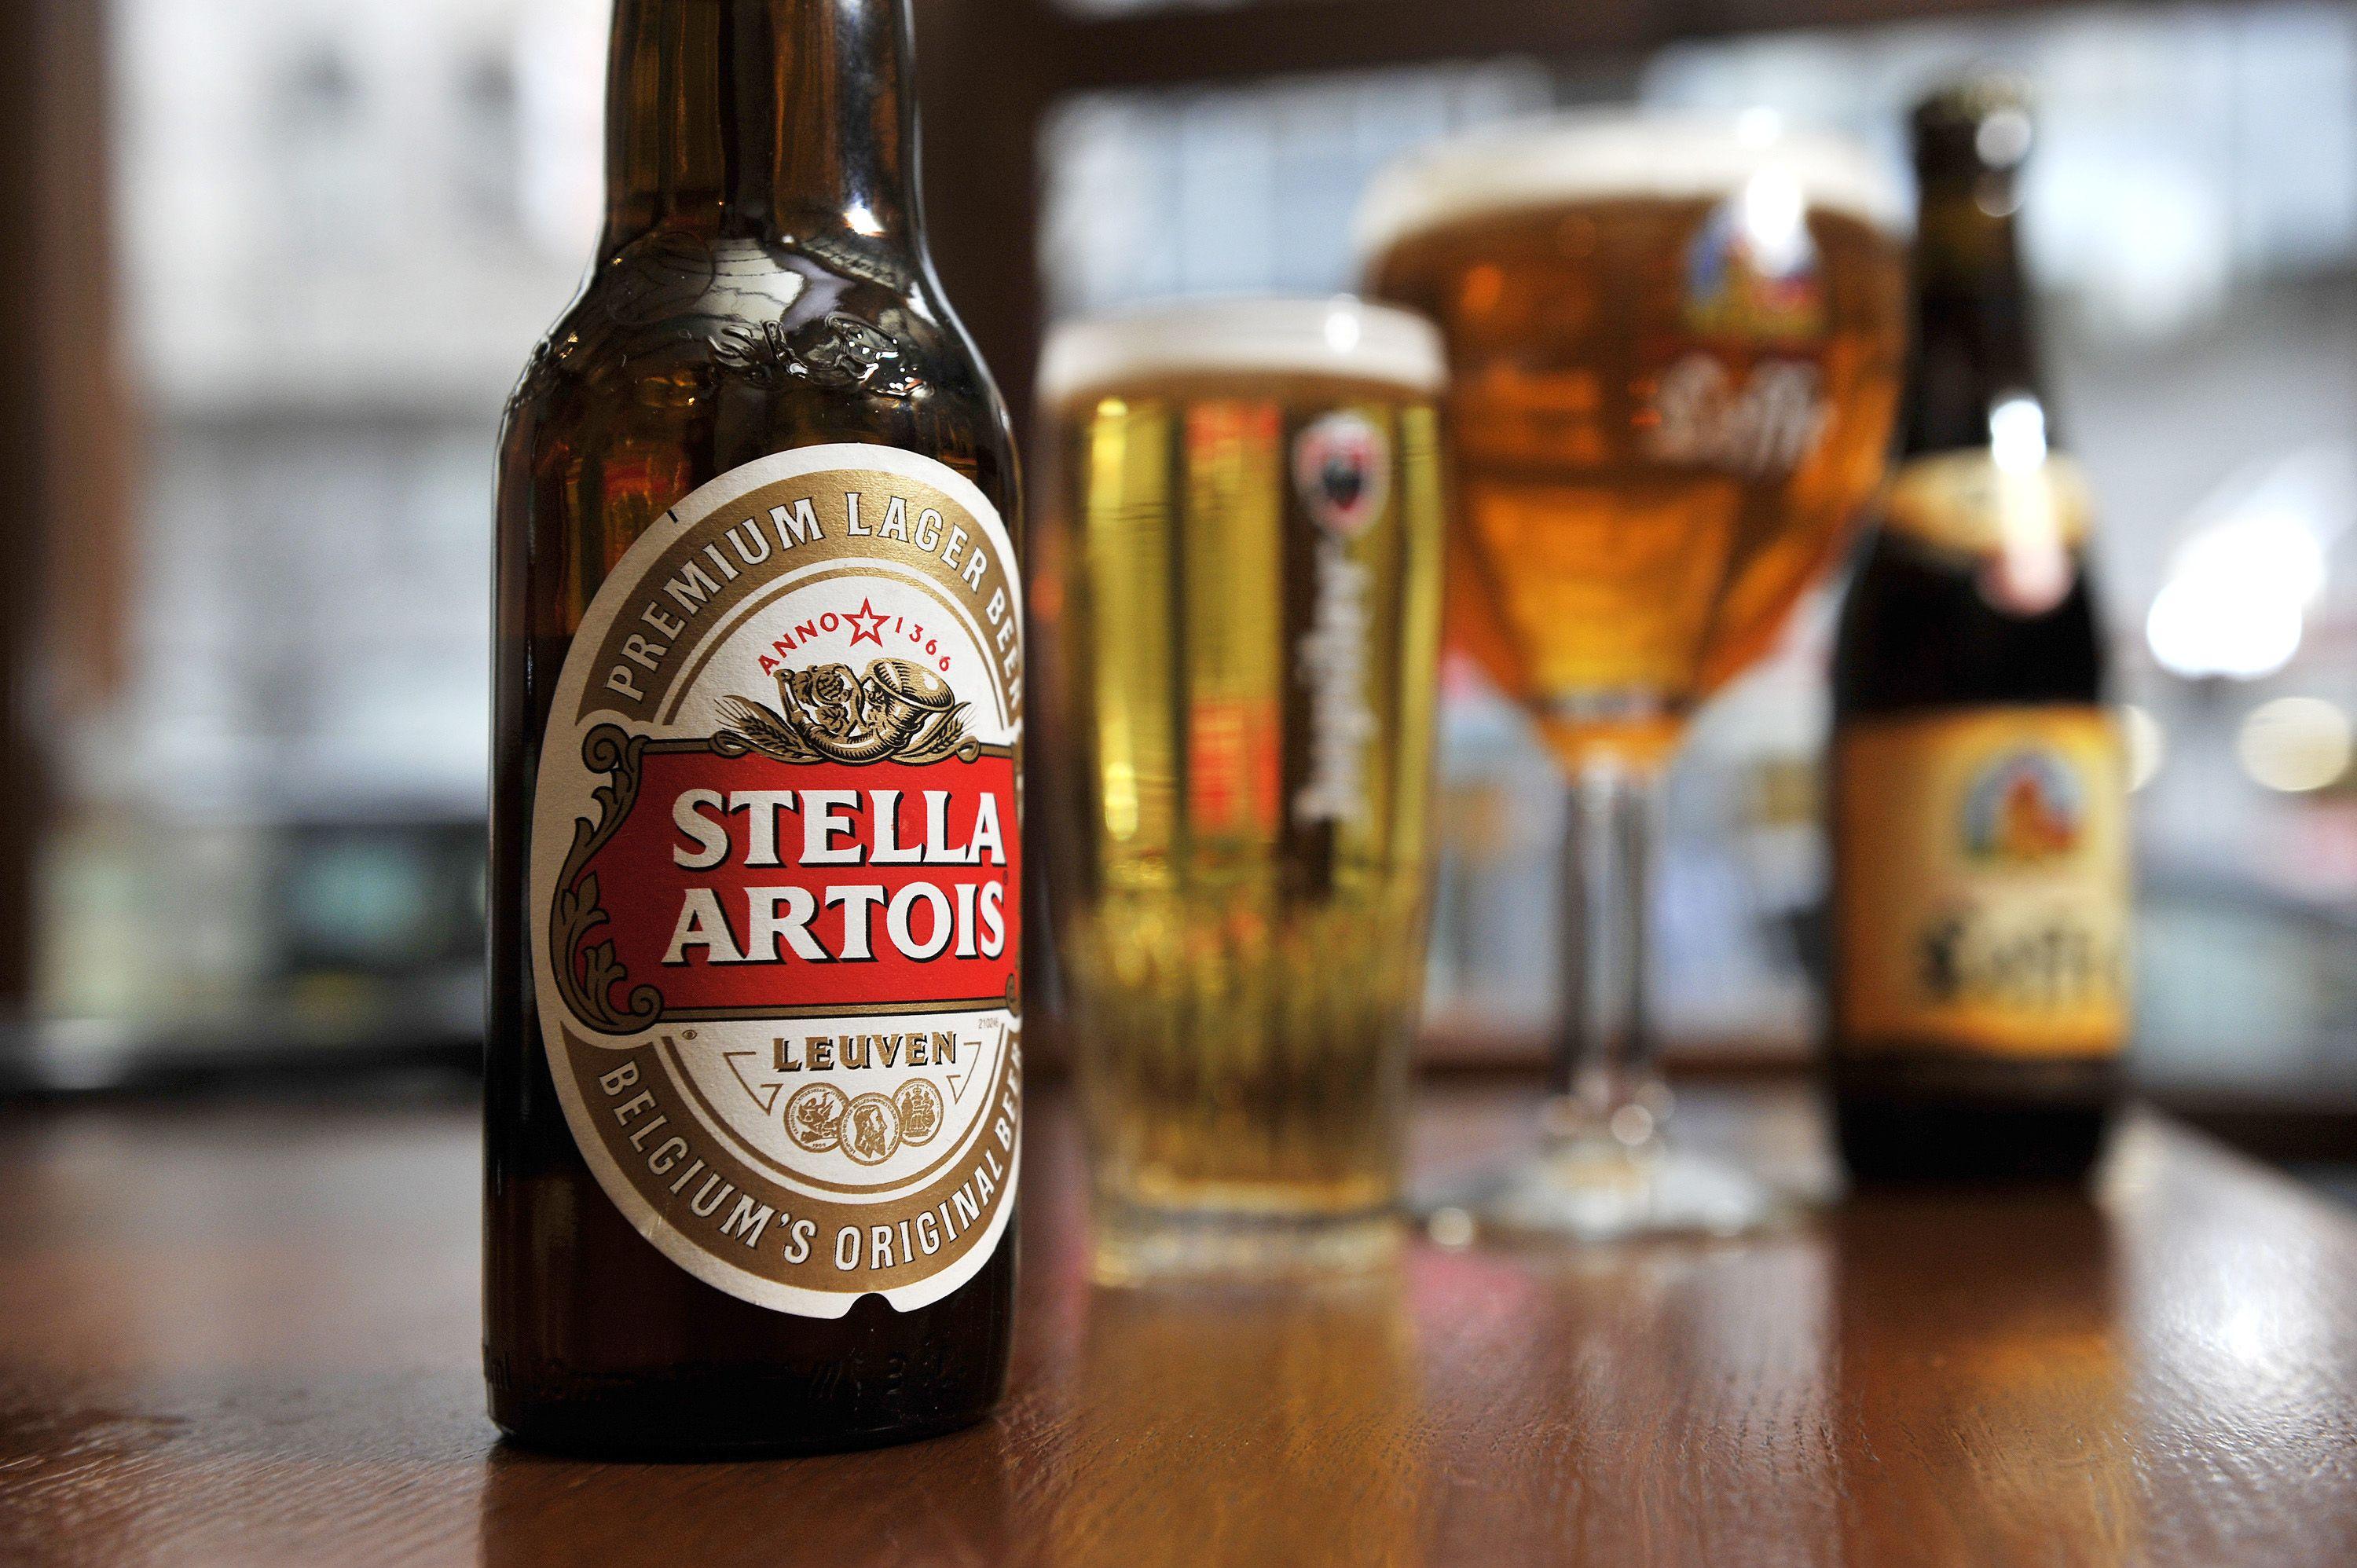 Stella Artois Logo - These Are the 10 Oldest Logos in the World